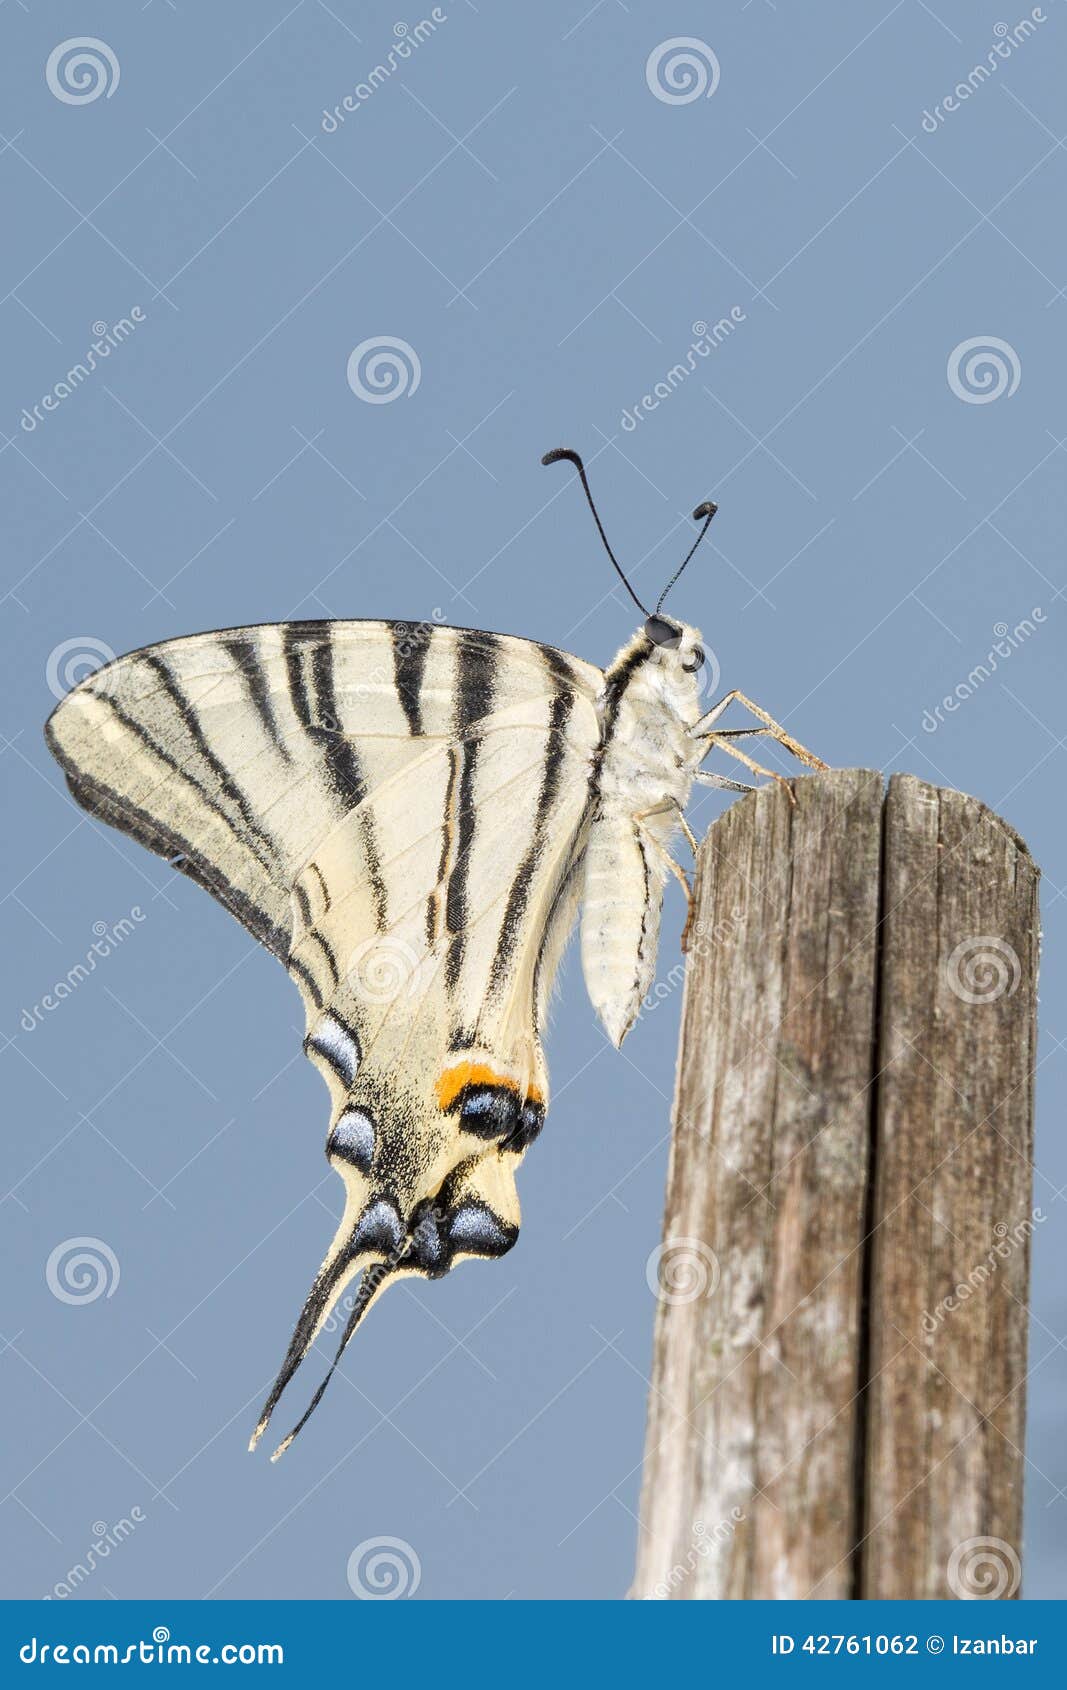 macaon butterfly